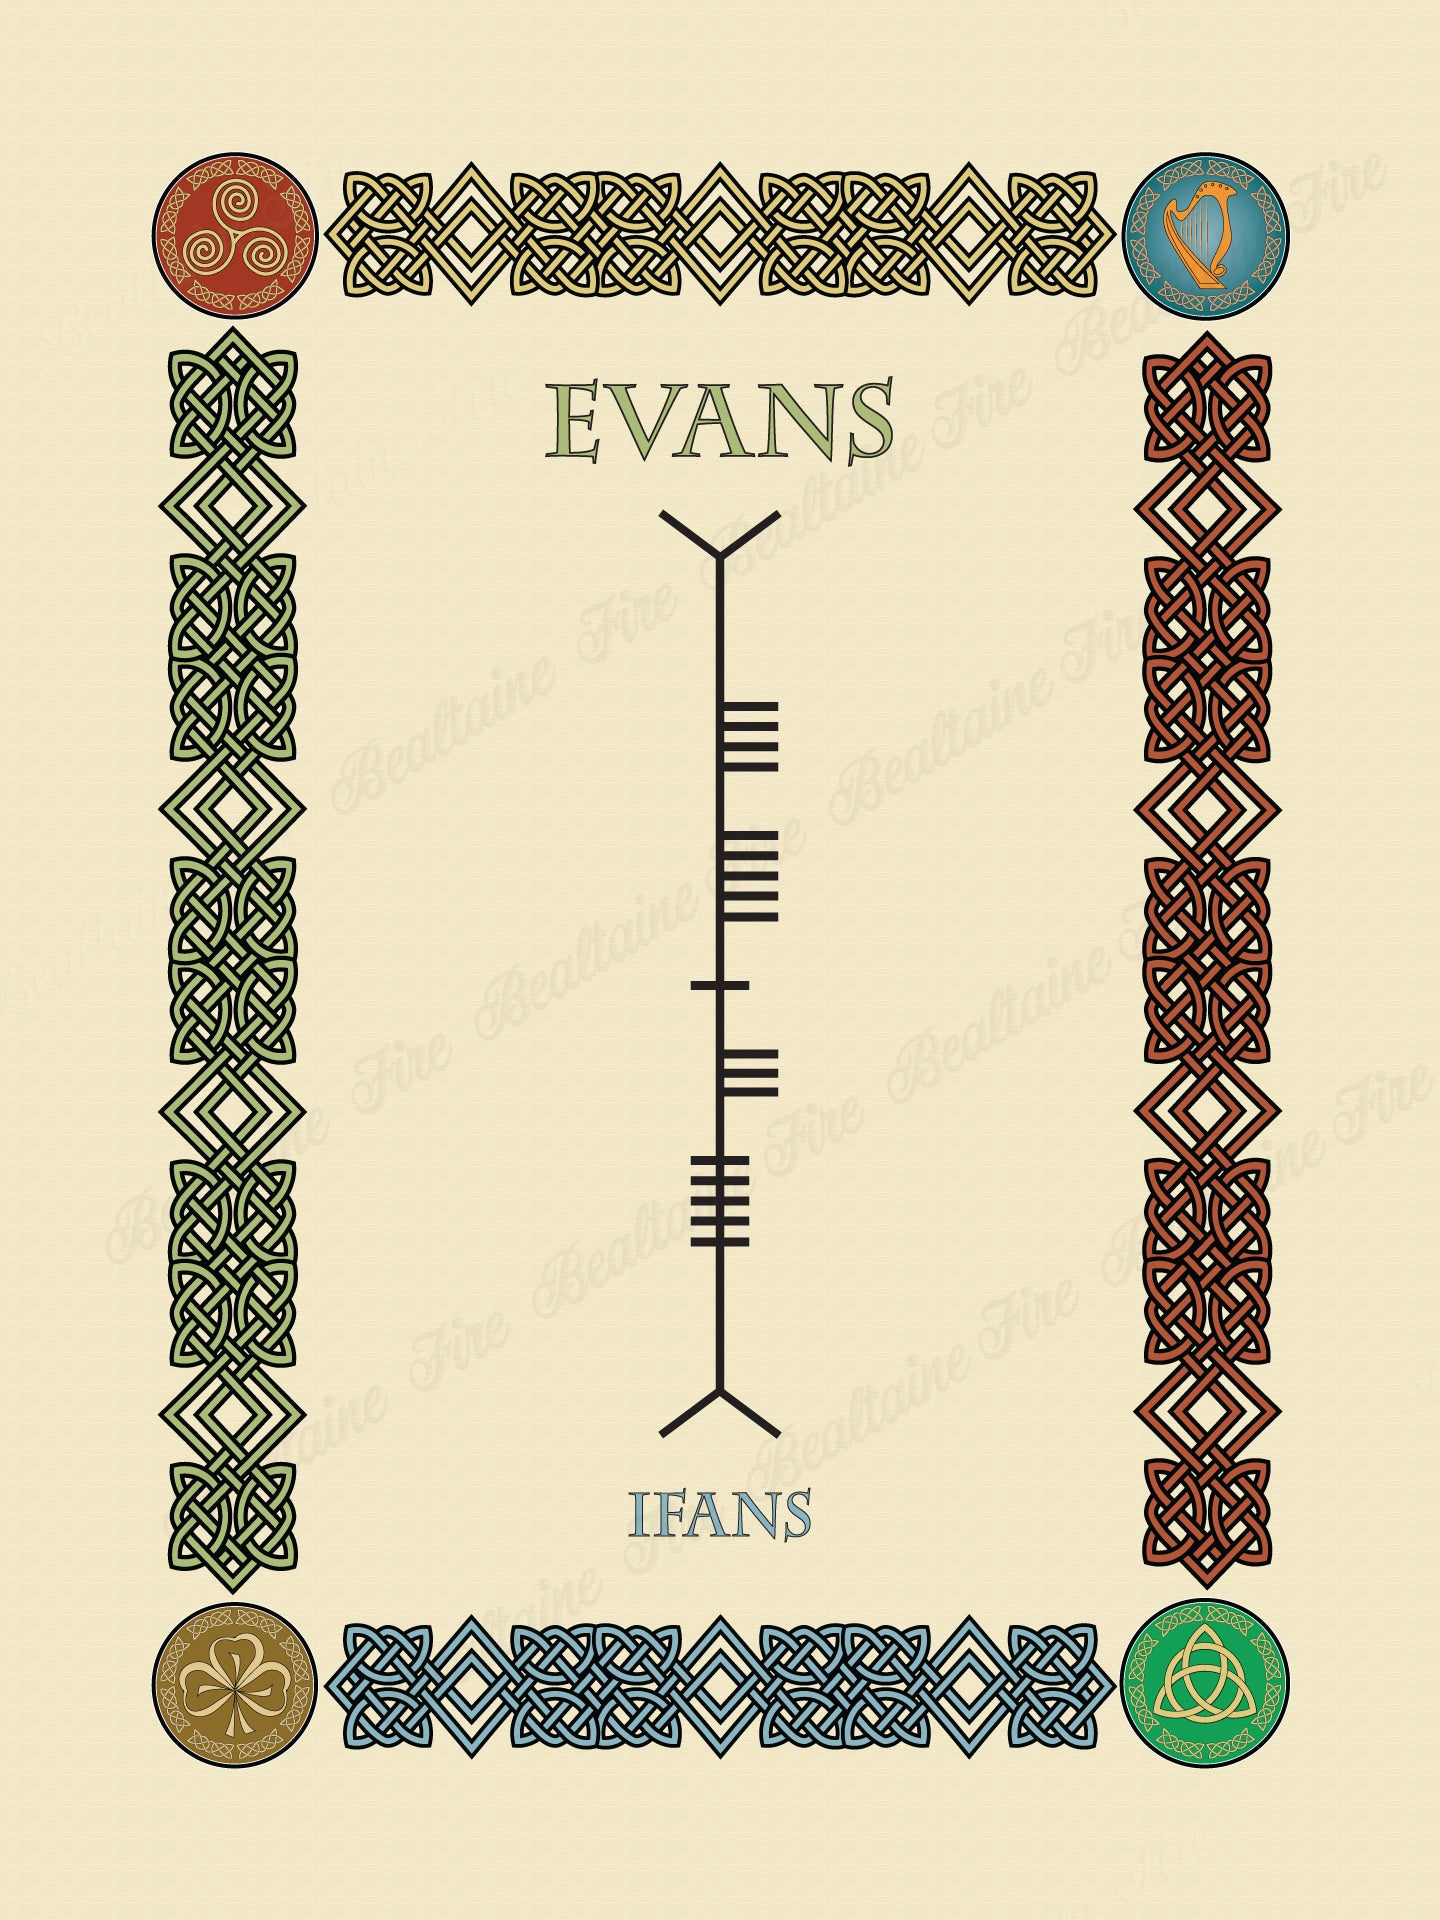 Evans in Old Irish and Ogham - PDF Download